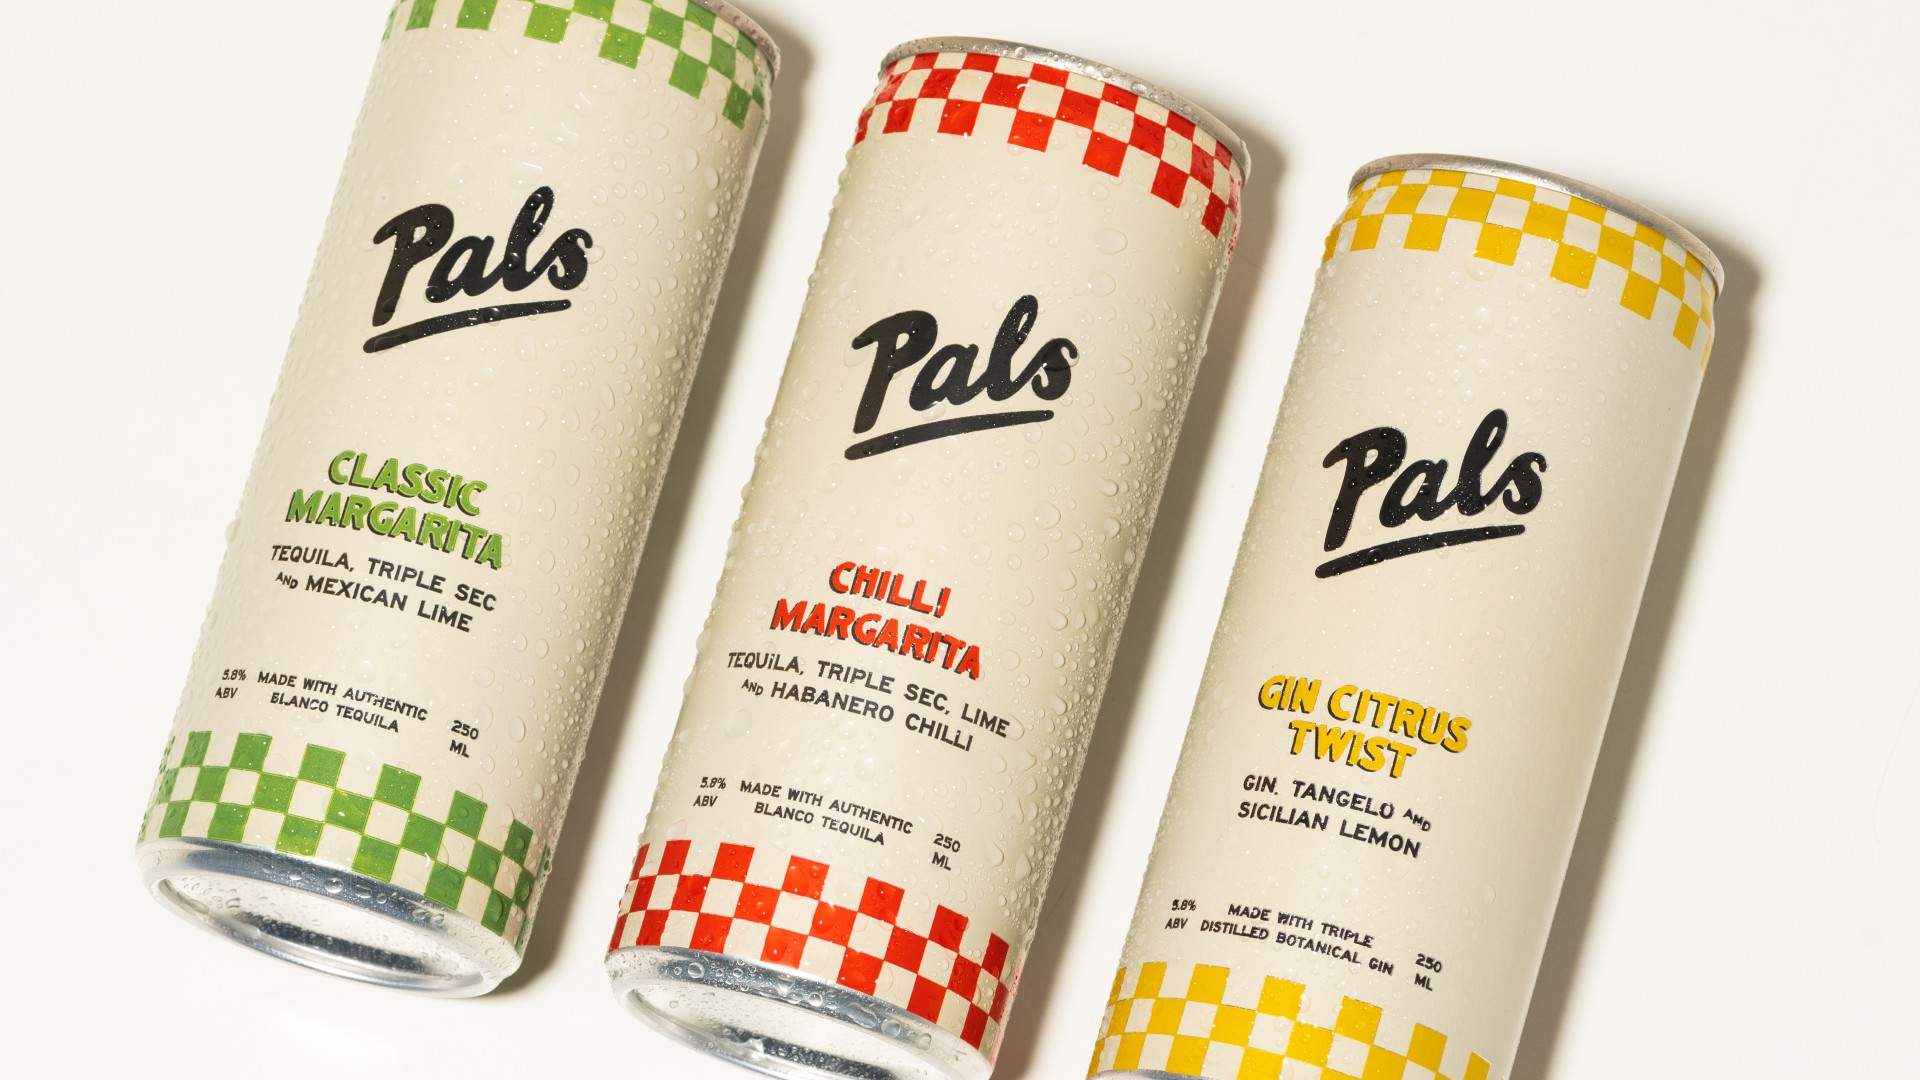 Cheers: Pals Is Adding Two Types of Margarita and a Gin Citrus Twist to Its Canned Cocktail Range